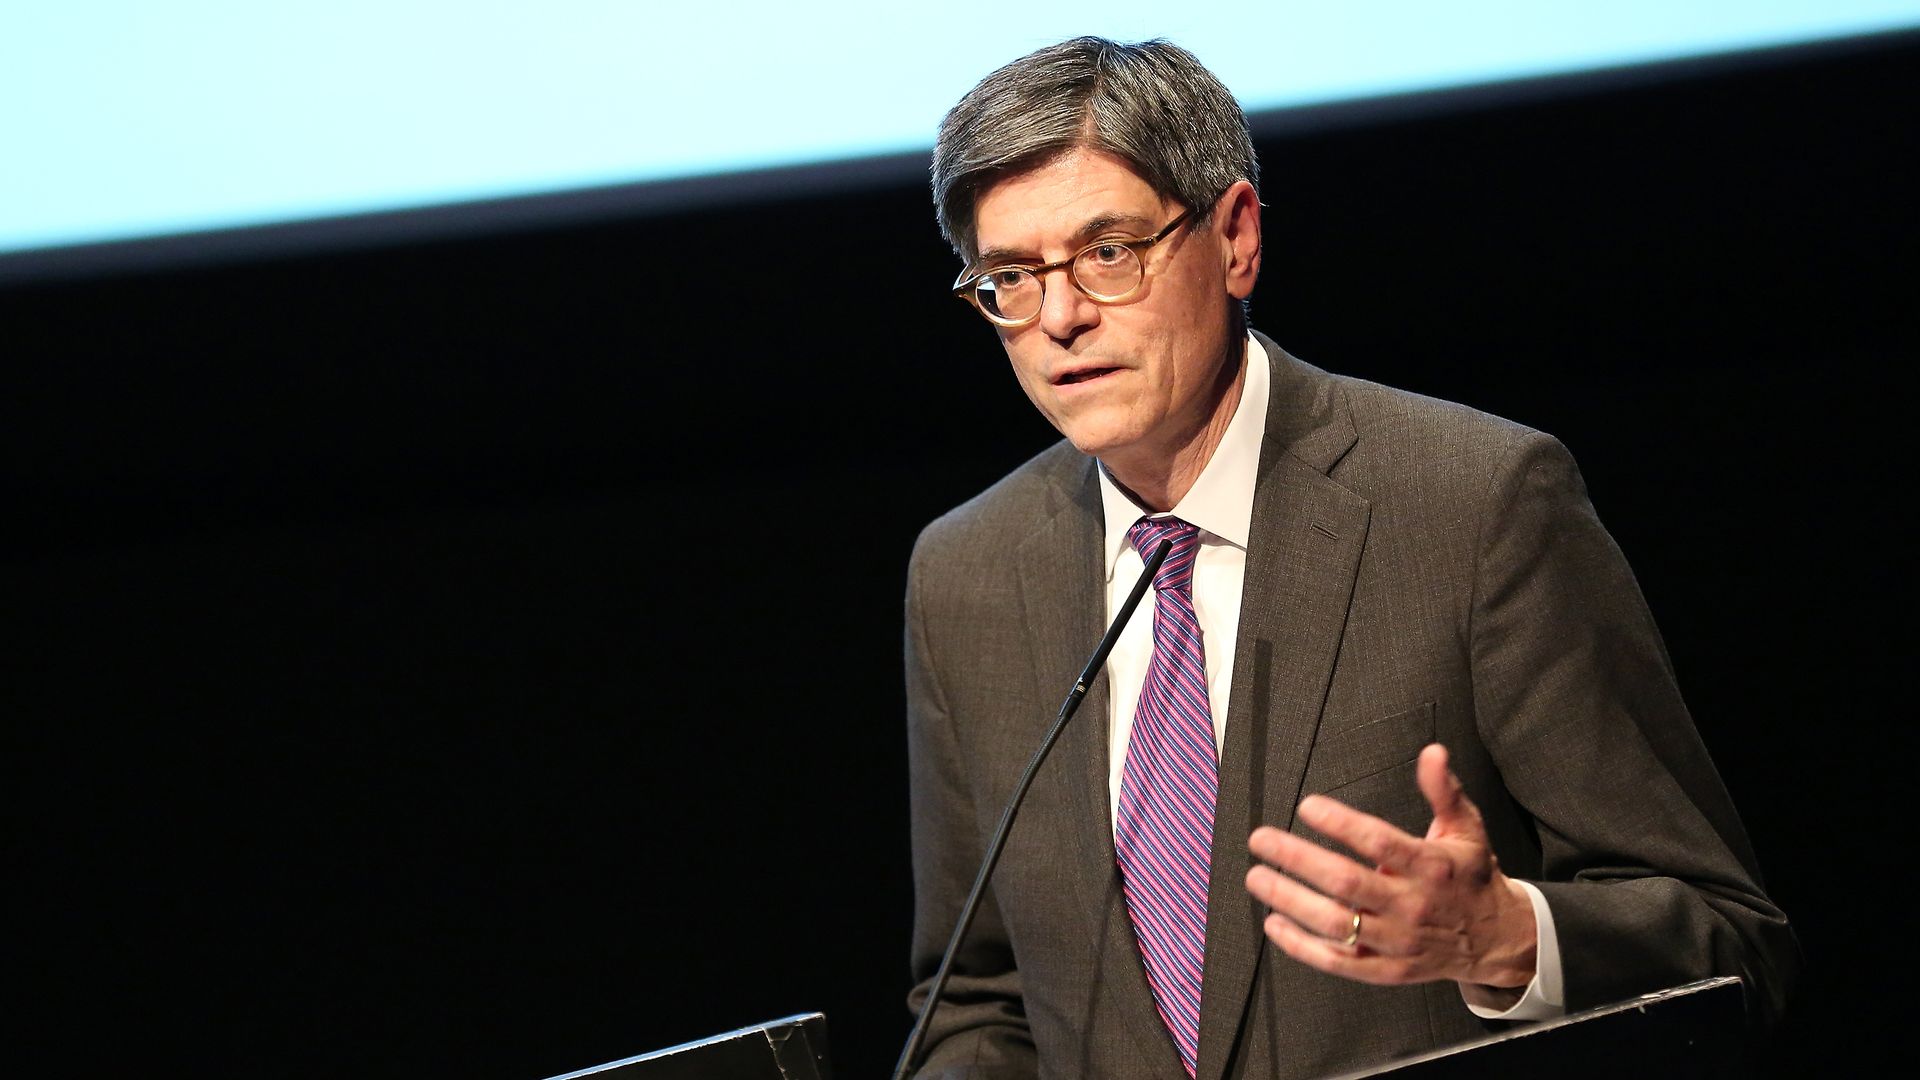 Honoree Jacob Lew speaks on stage during the Queens Community House's 2018 Strengthening Neighborhoods Inspiring Change Gala at Museum of Moving Image on October 23, 2018 in Astoria, New York. 